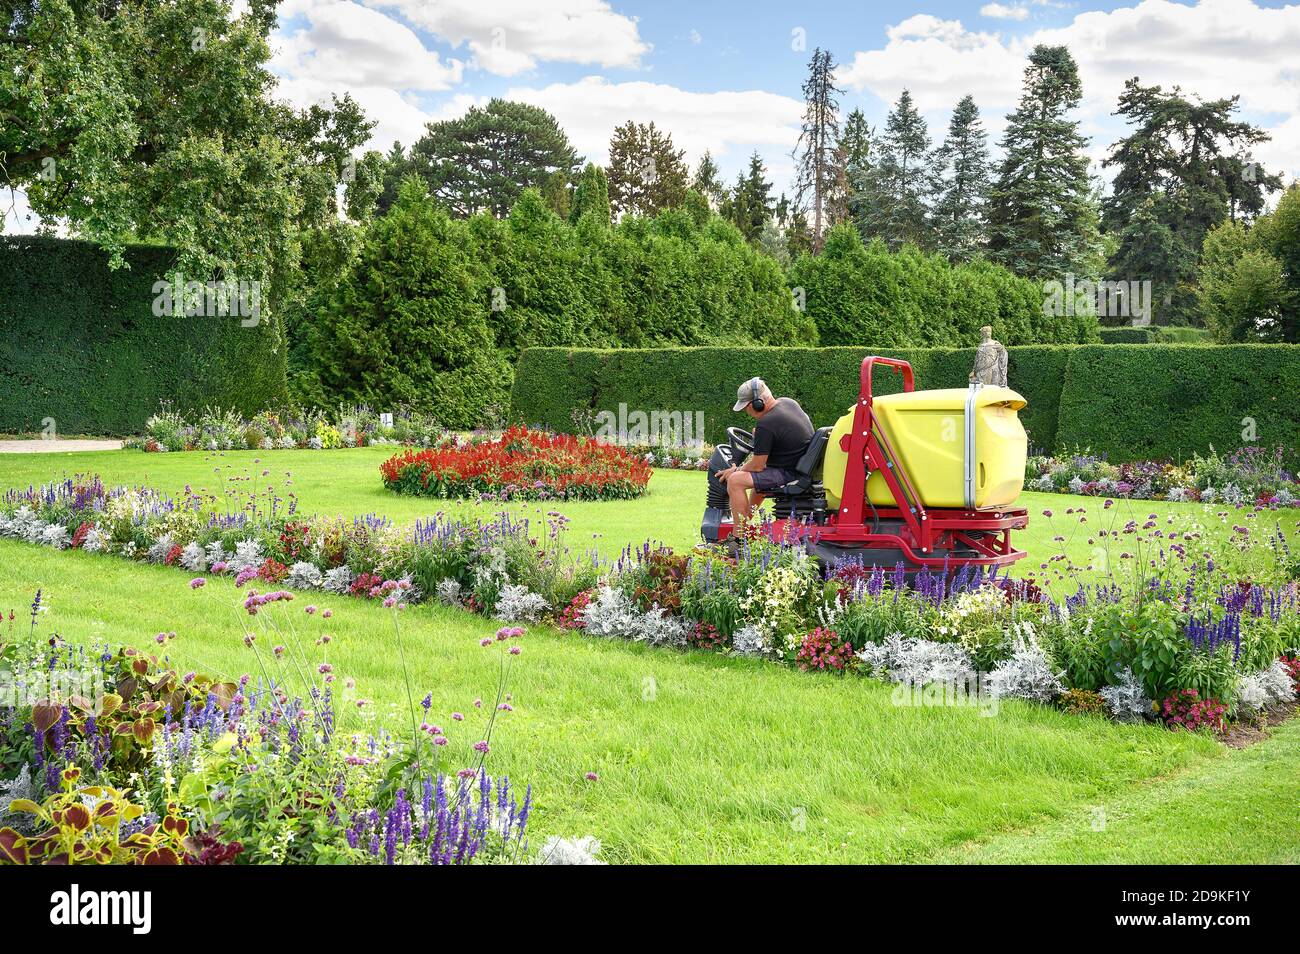 Man mows the grass in flower garden of Lednice chateau by riding mowing machine in sunny day Stock Photo